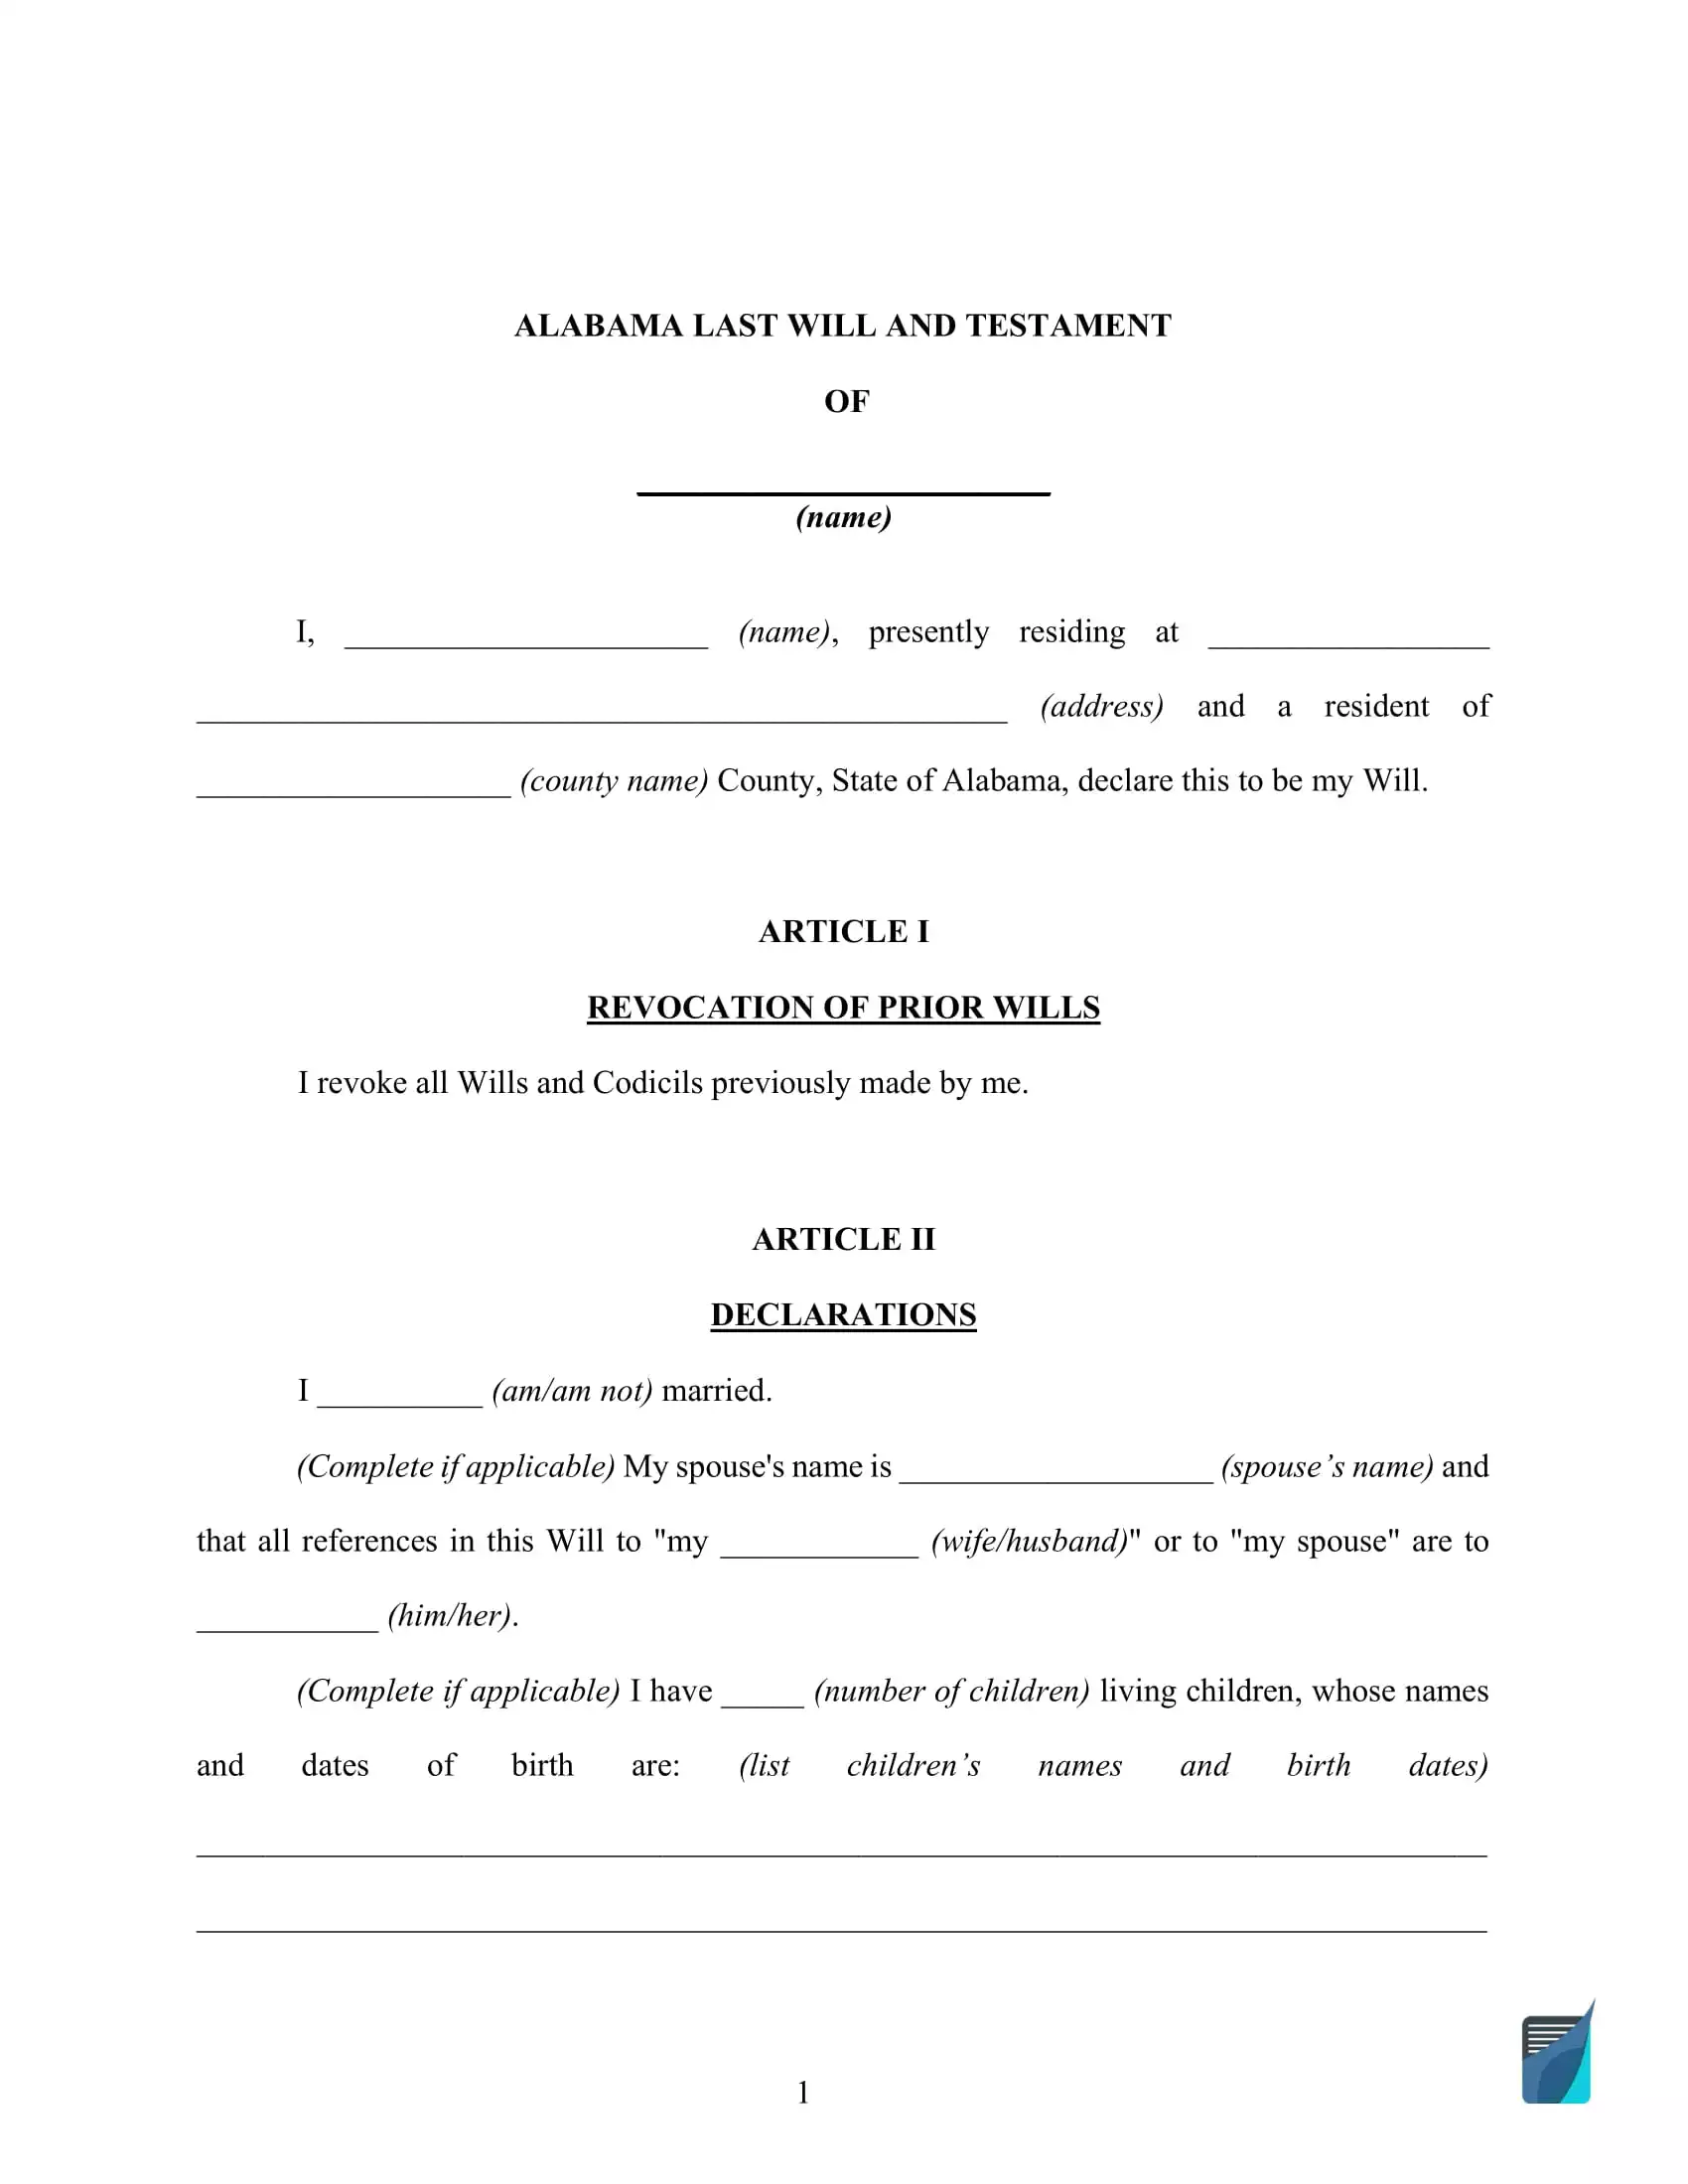 Fillable Alabama Last Will and Testament Form [FREE]  FormsPal